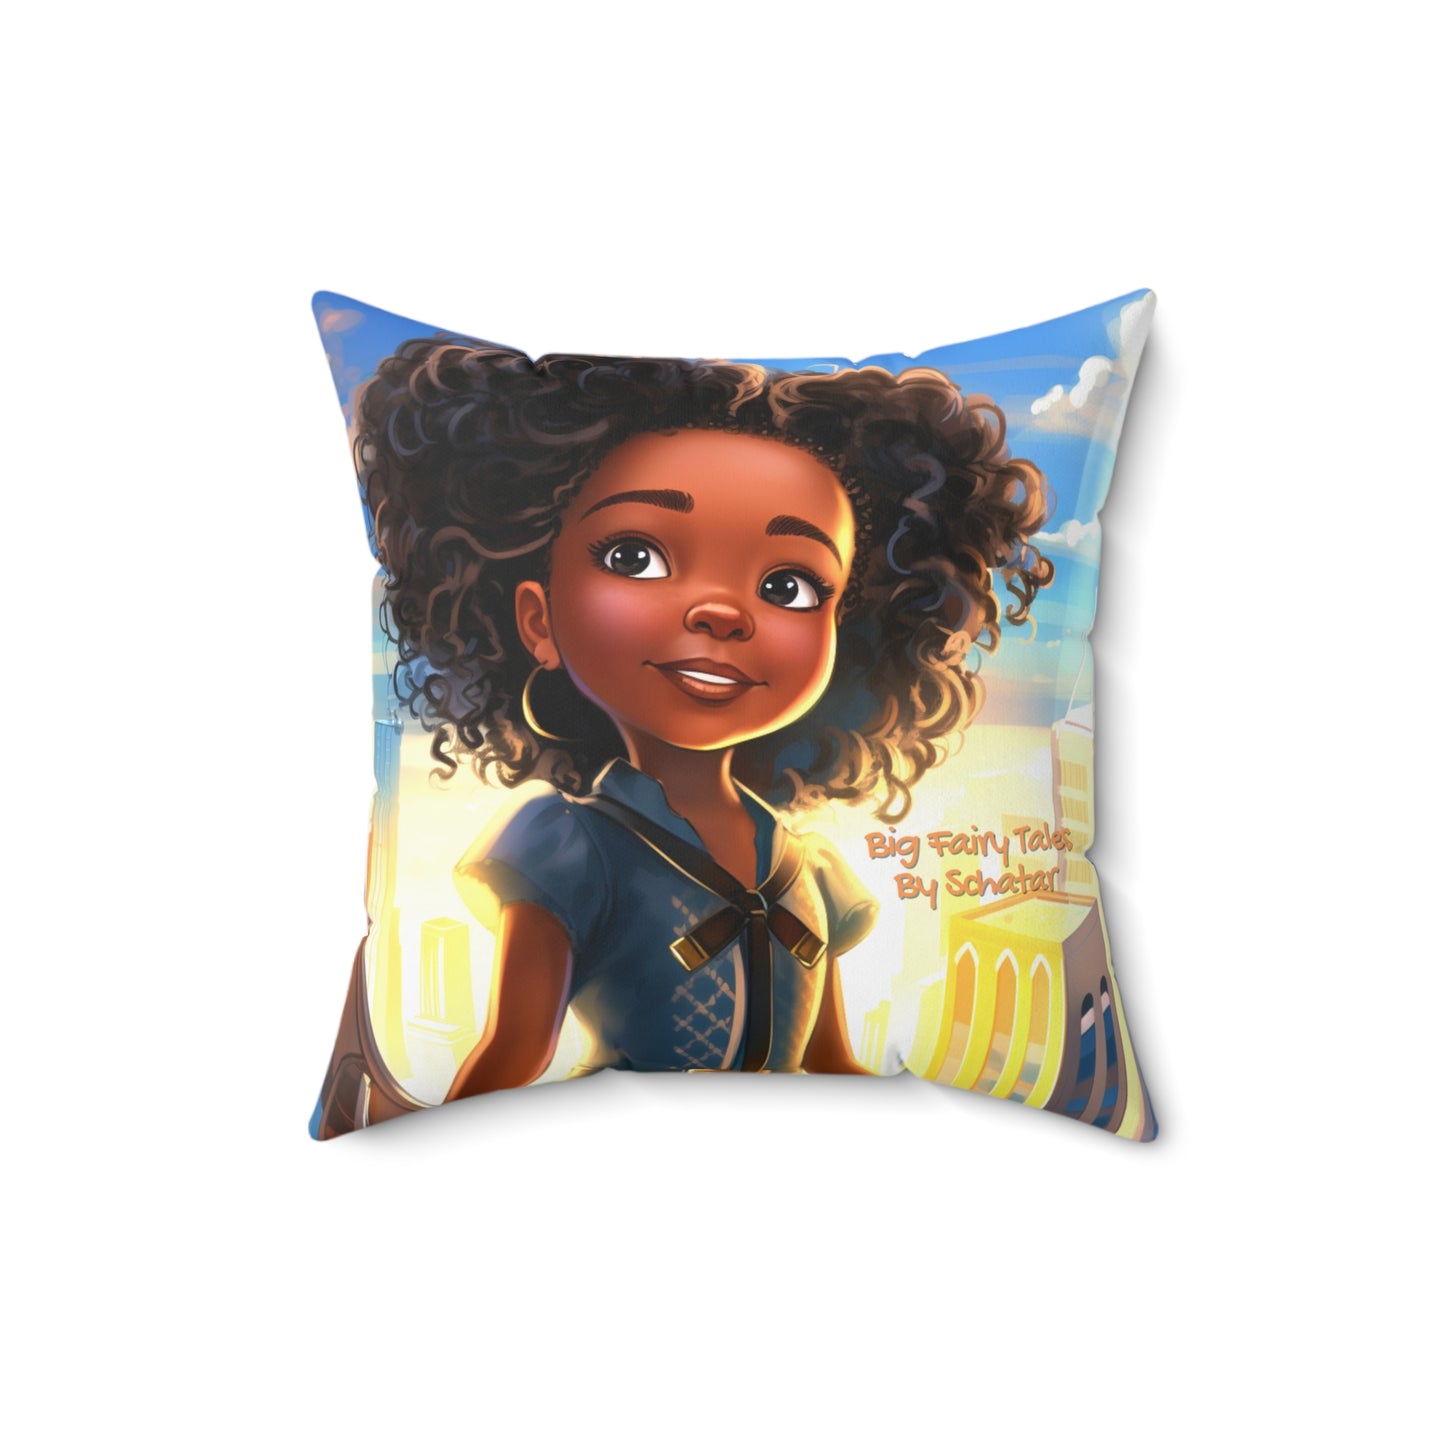 Real Estate Mogul - Big Little Professionals Plush Pillow 10 From Big Fairy Tales By Schatar